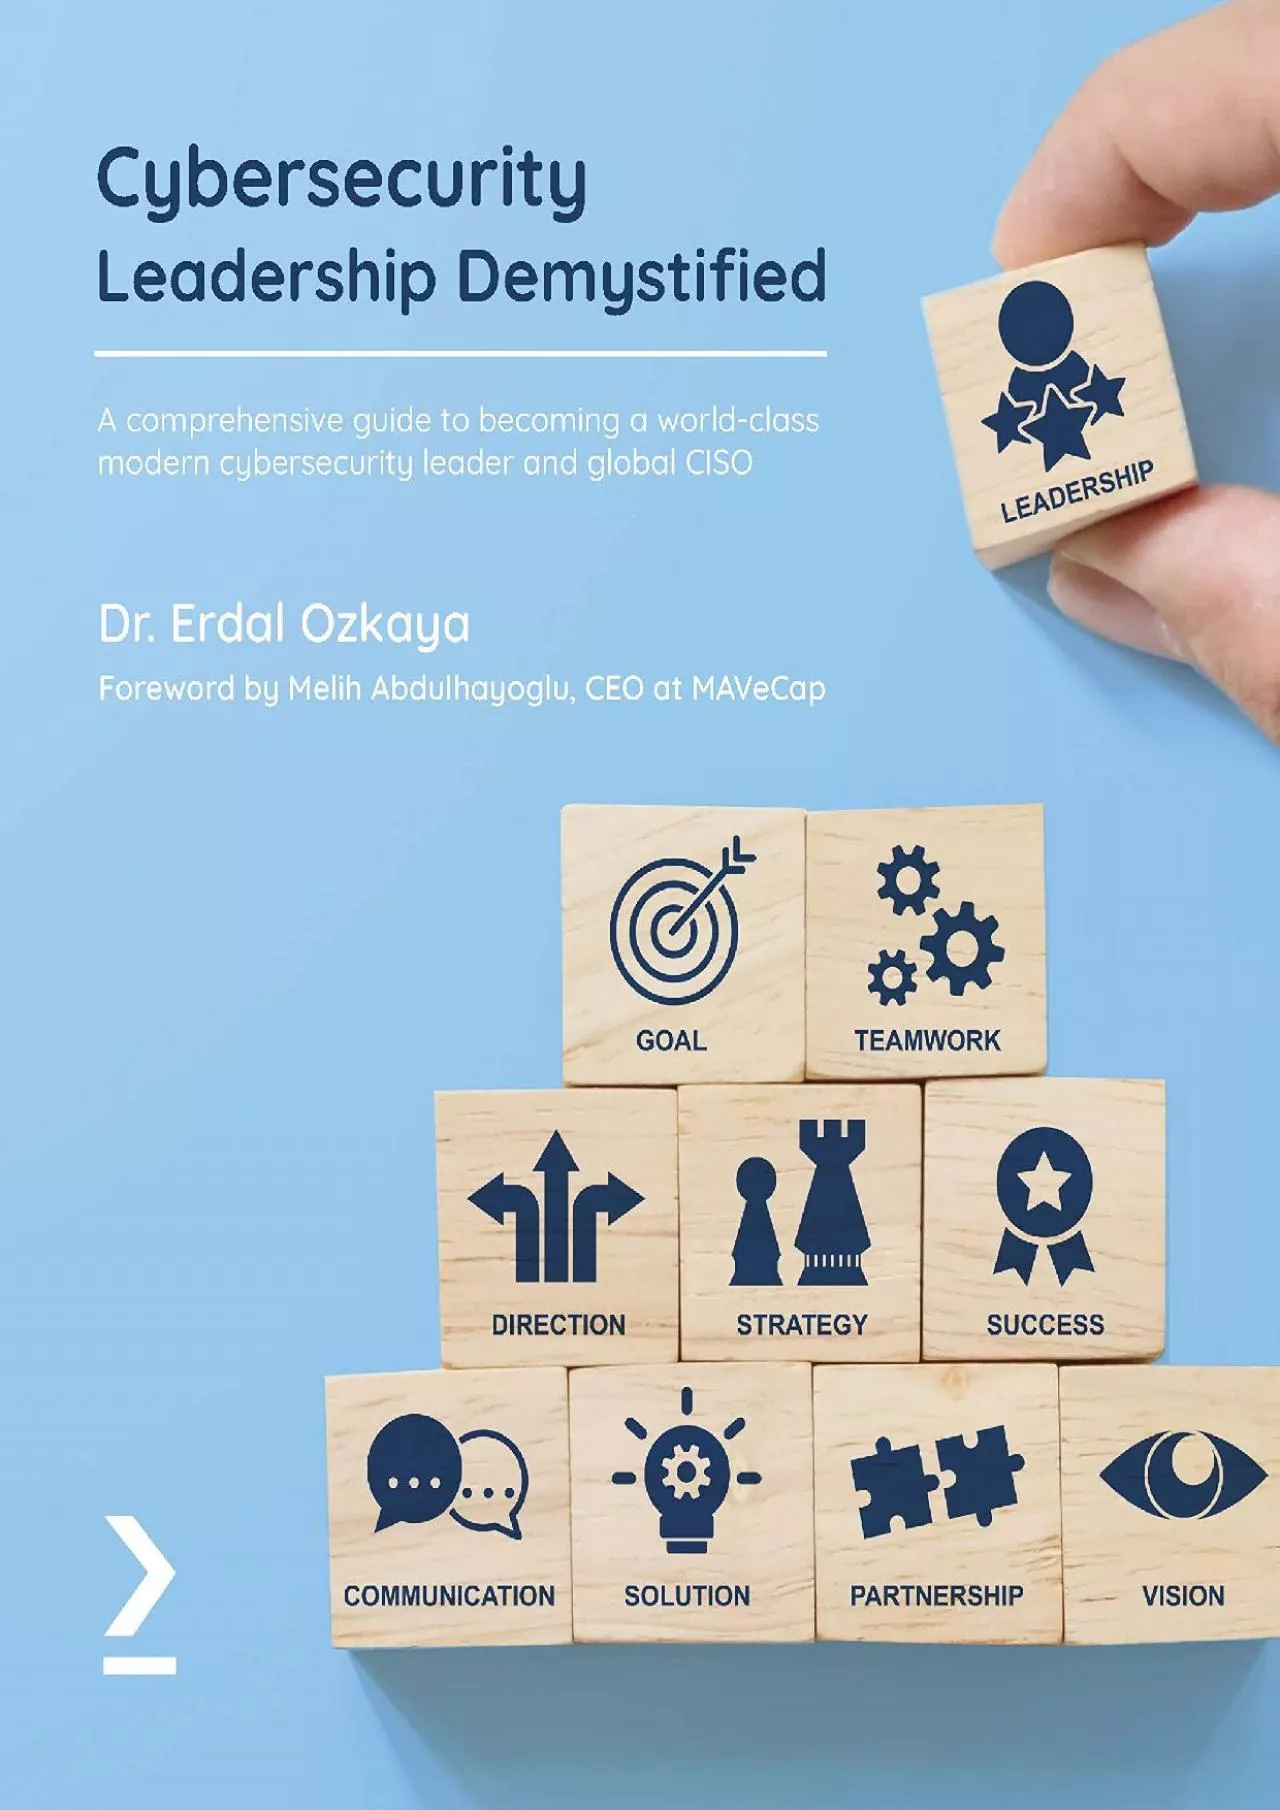 [READING BOOK]-Cybersecurity Leadership Demystified: A comprehensive guide to becoming